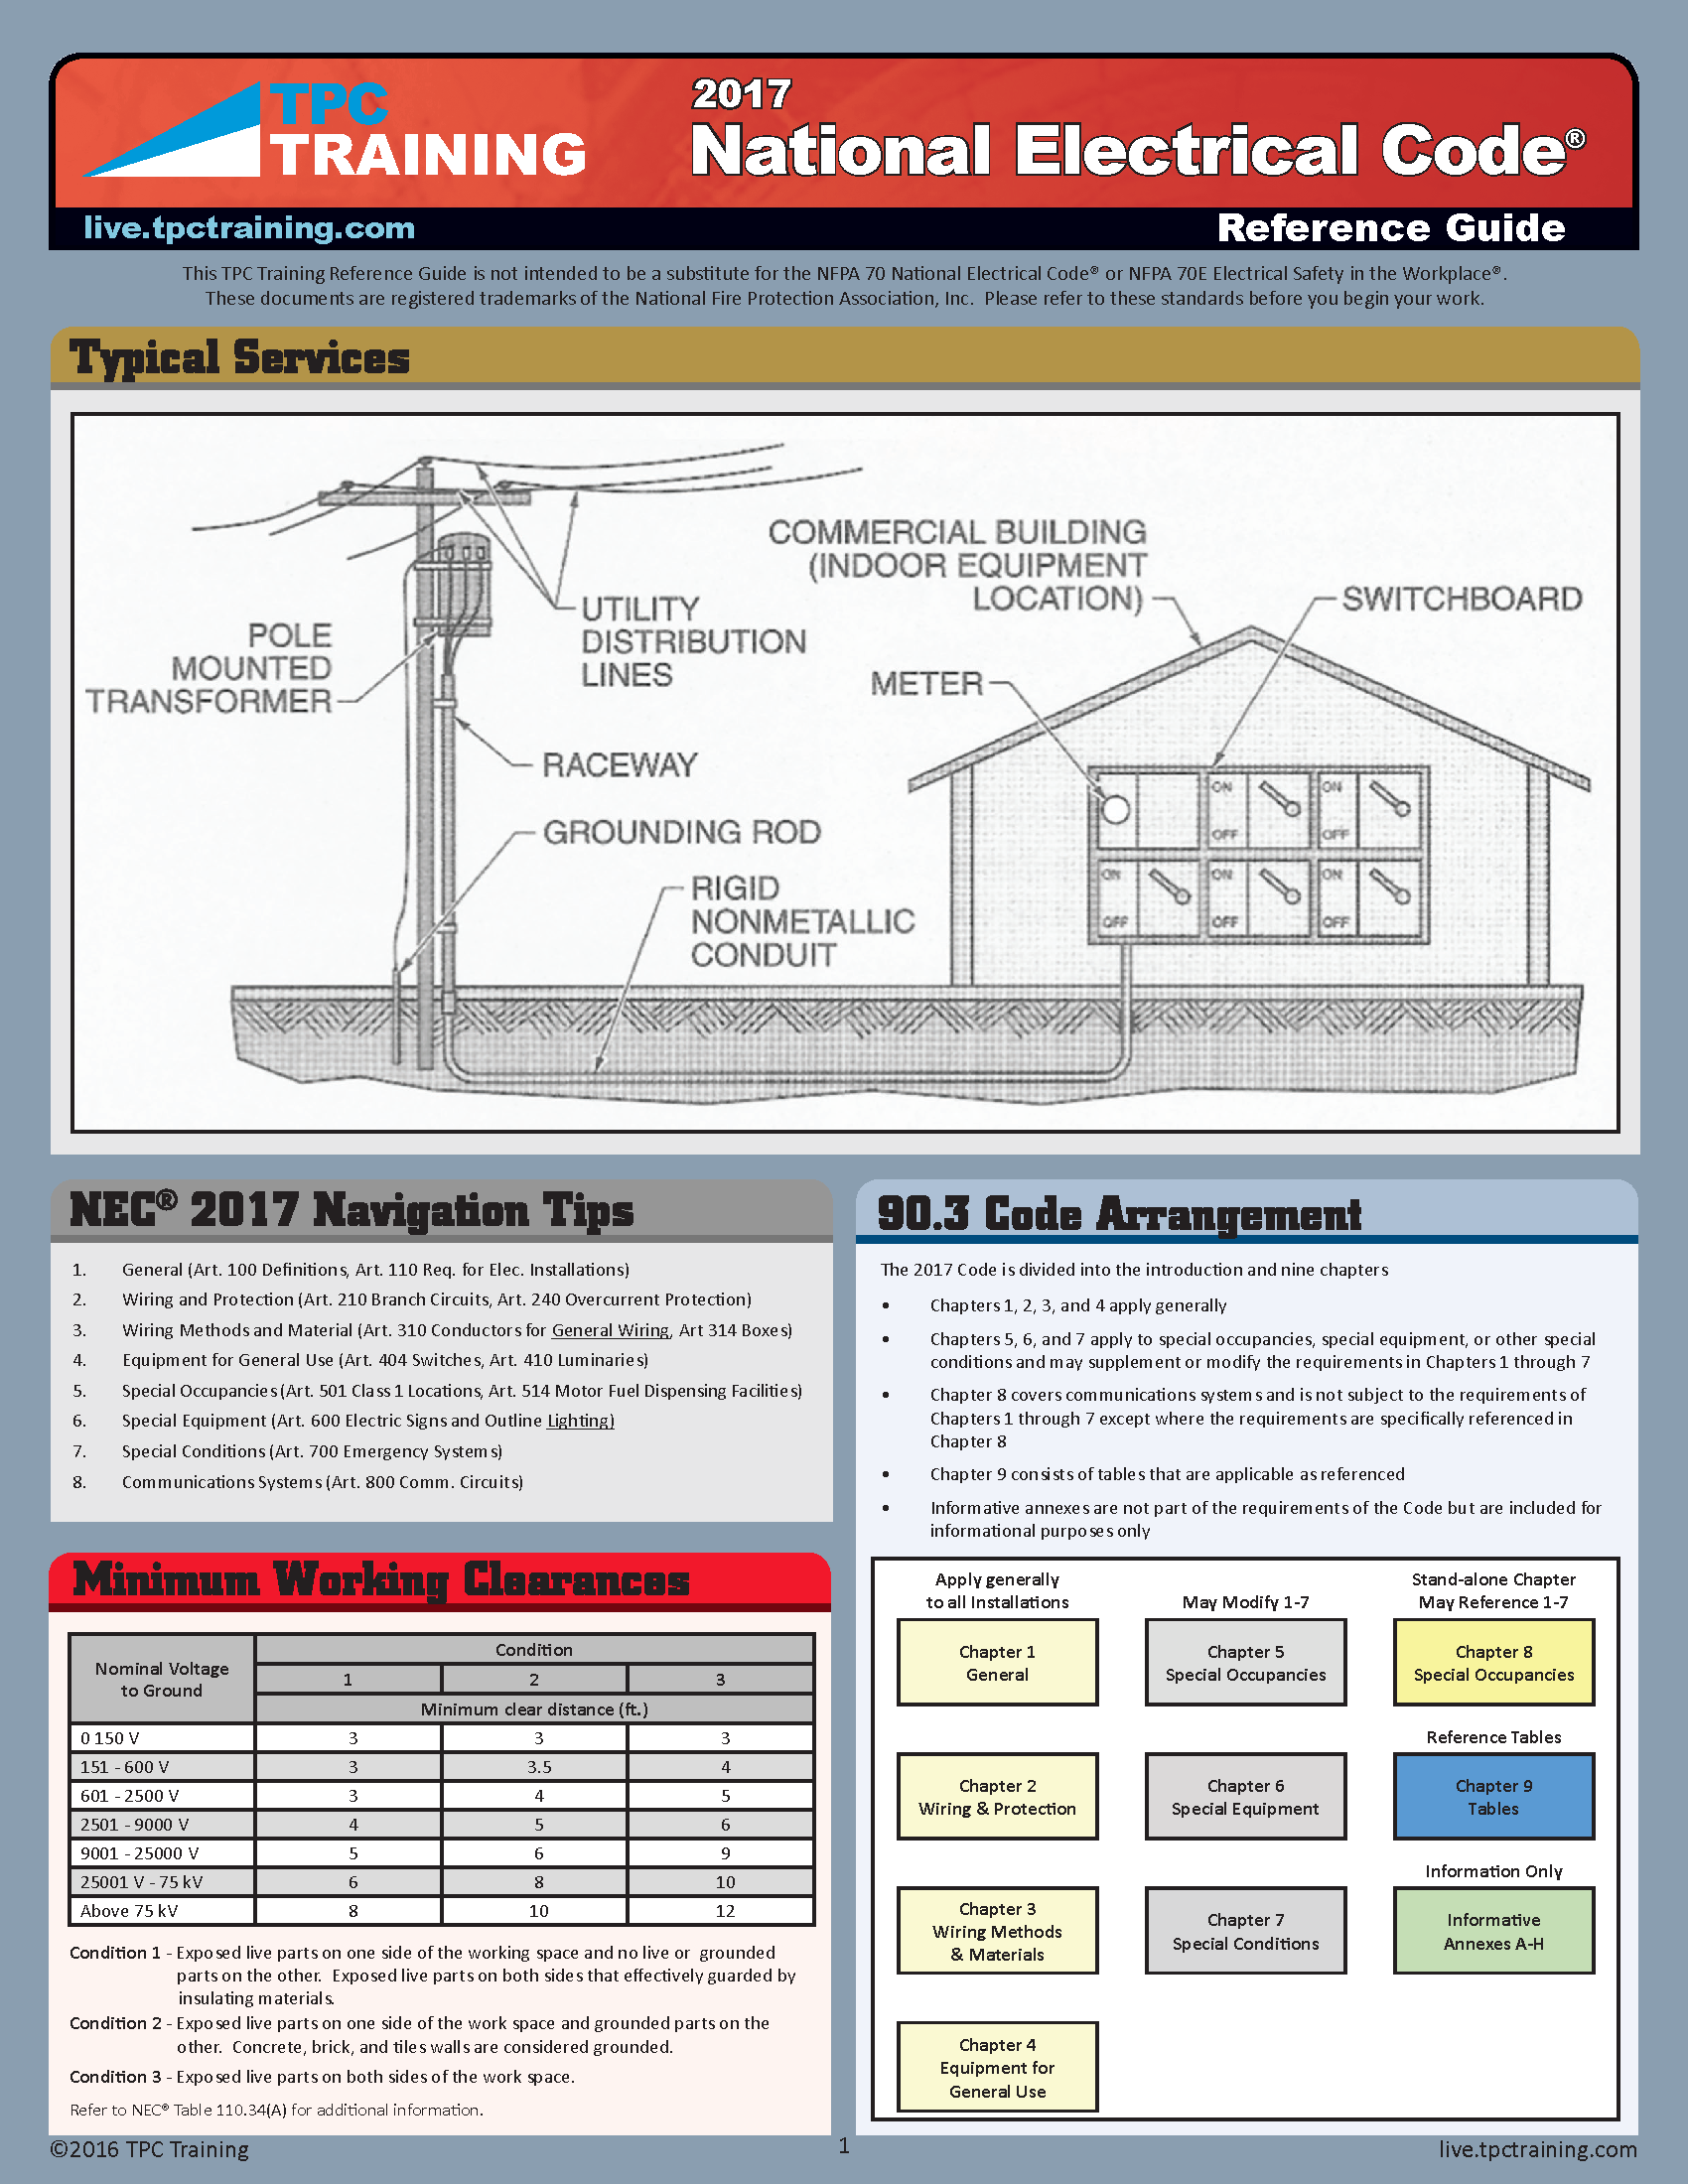 National Electrical Code Reference Guide